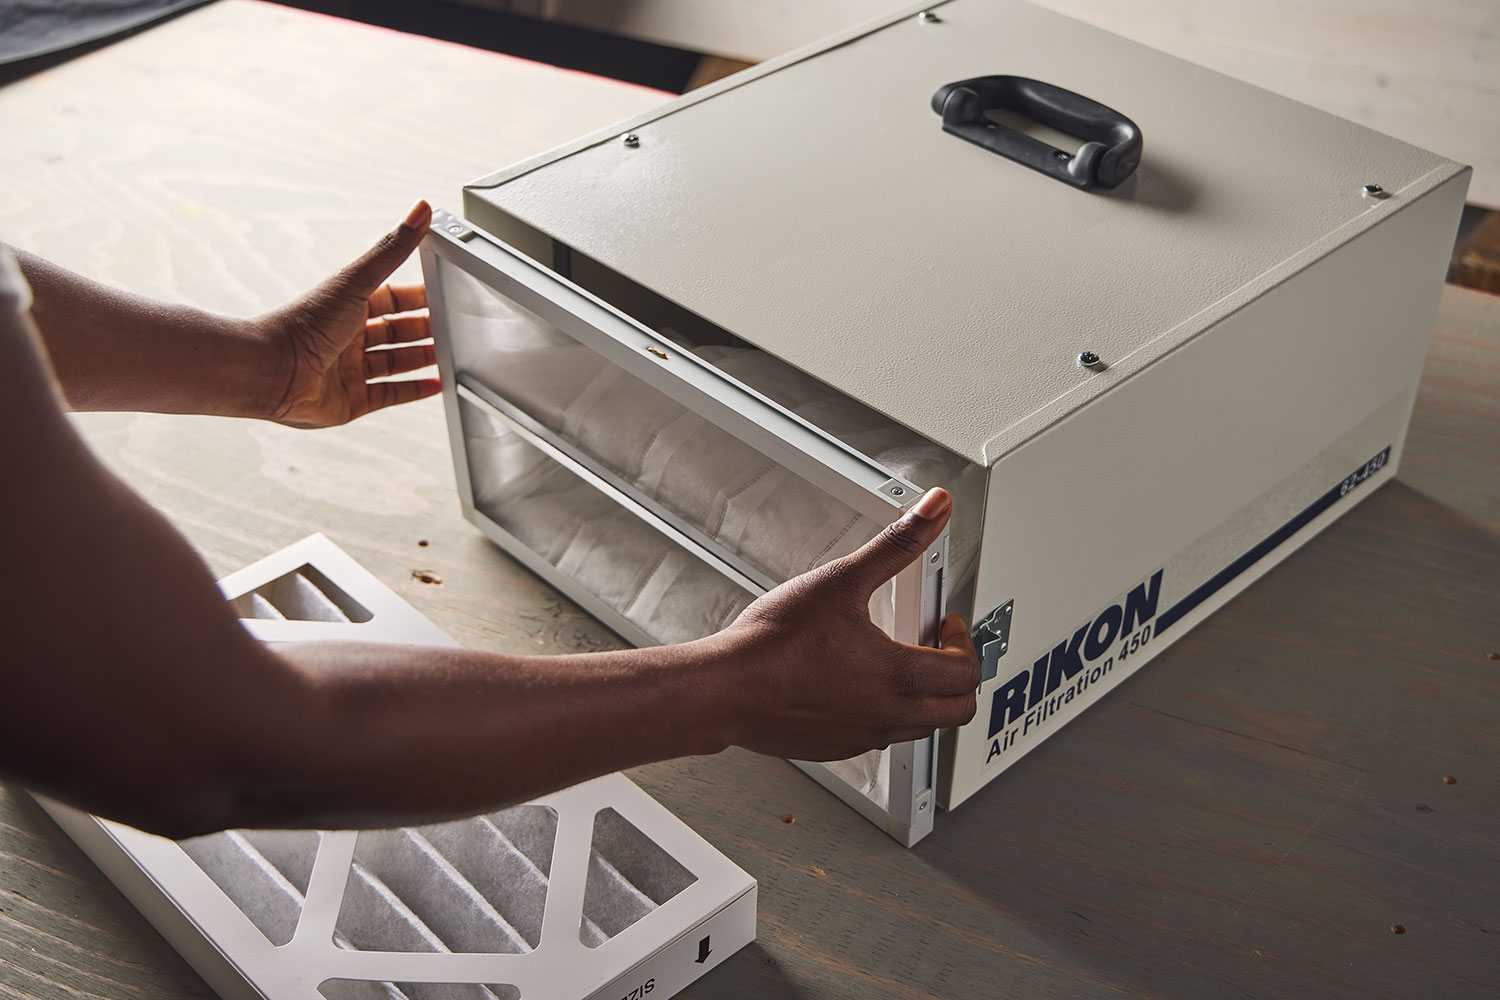 Opening a Rikon model 62-450 air cleaner for access to the inner pleated filter.